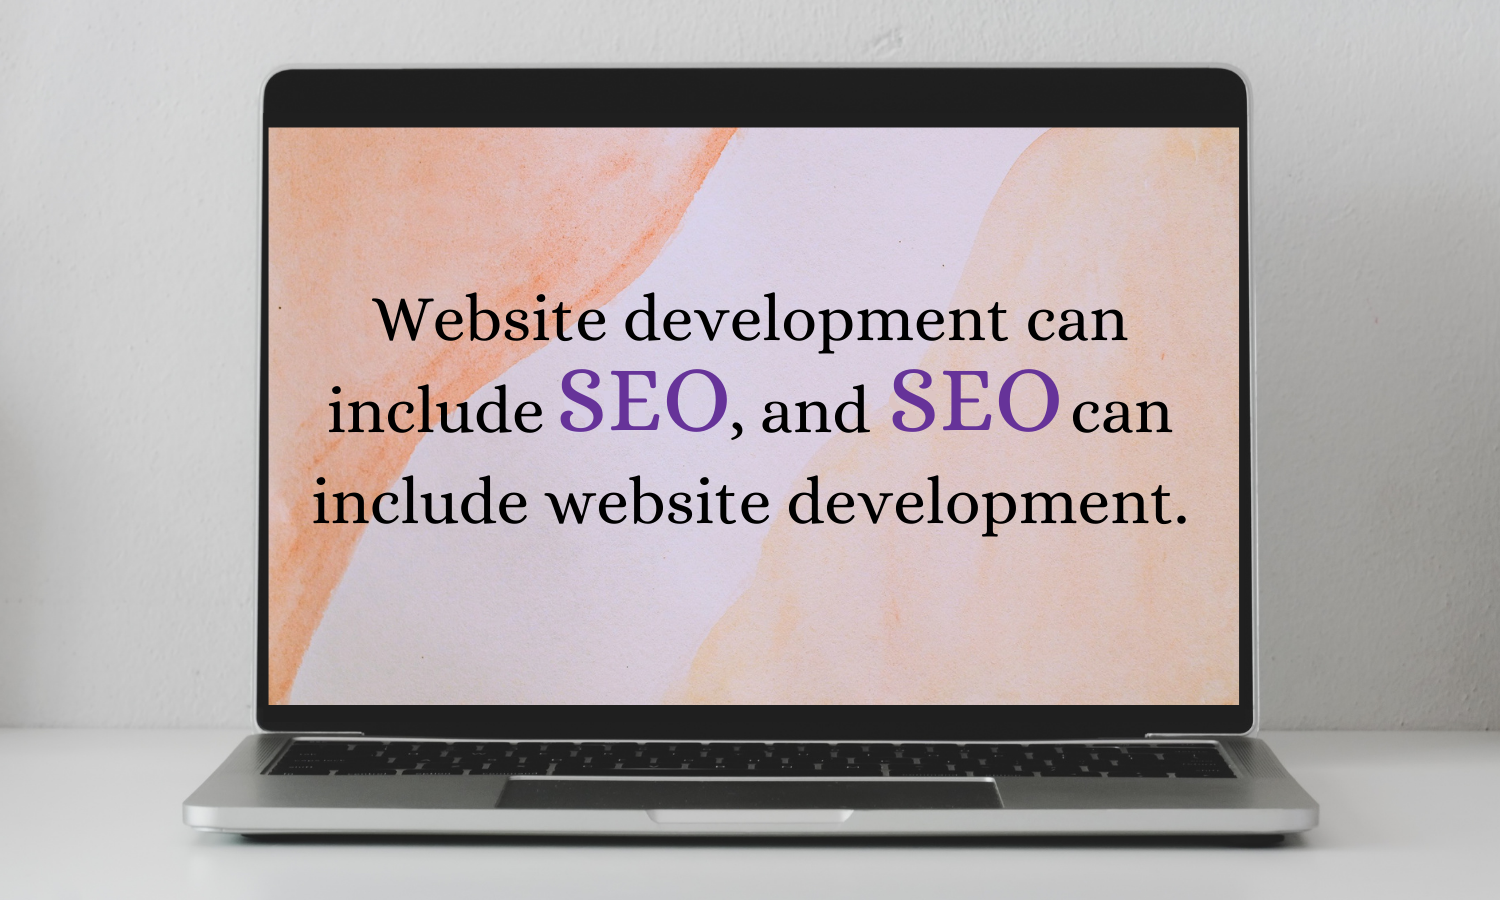 Website development can include SEO, and SEO can include website development.